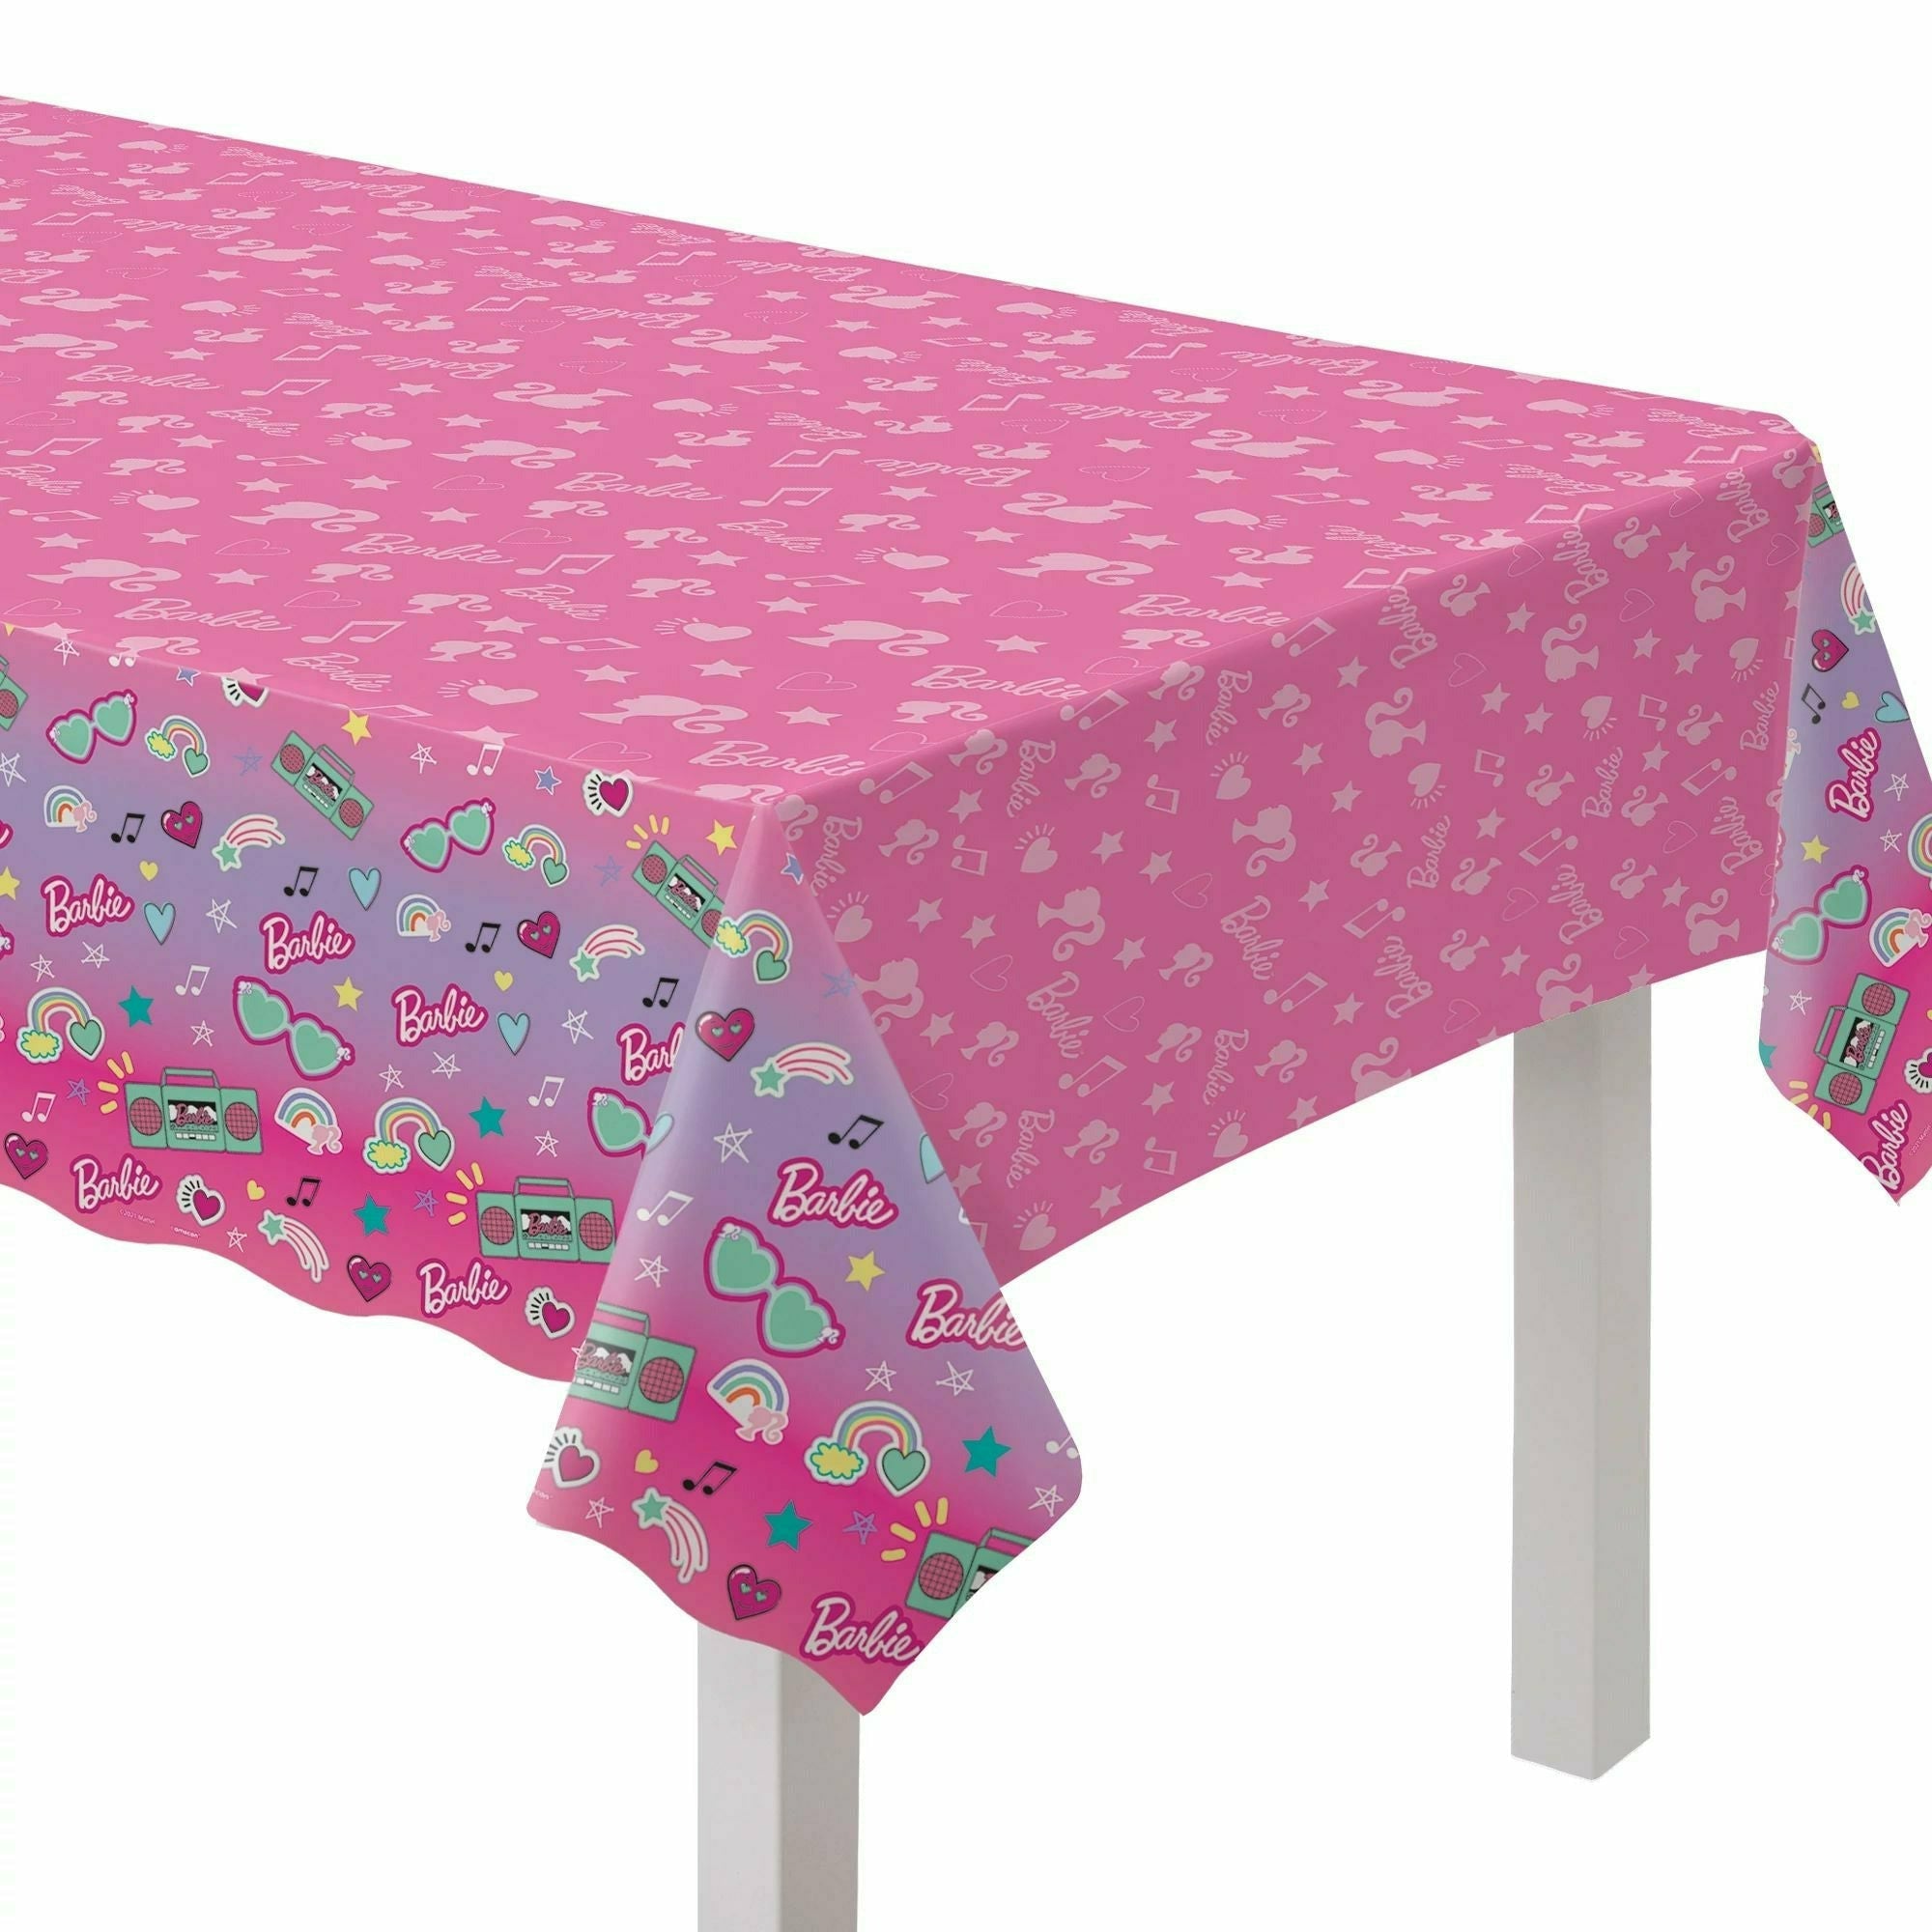 Amscan BIRTHDAY: JUVENILE Barbie Dream Together Plastic Table Cover